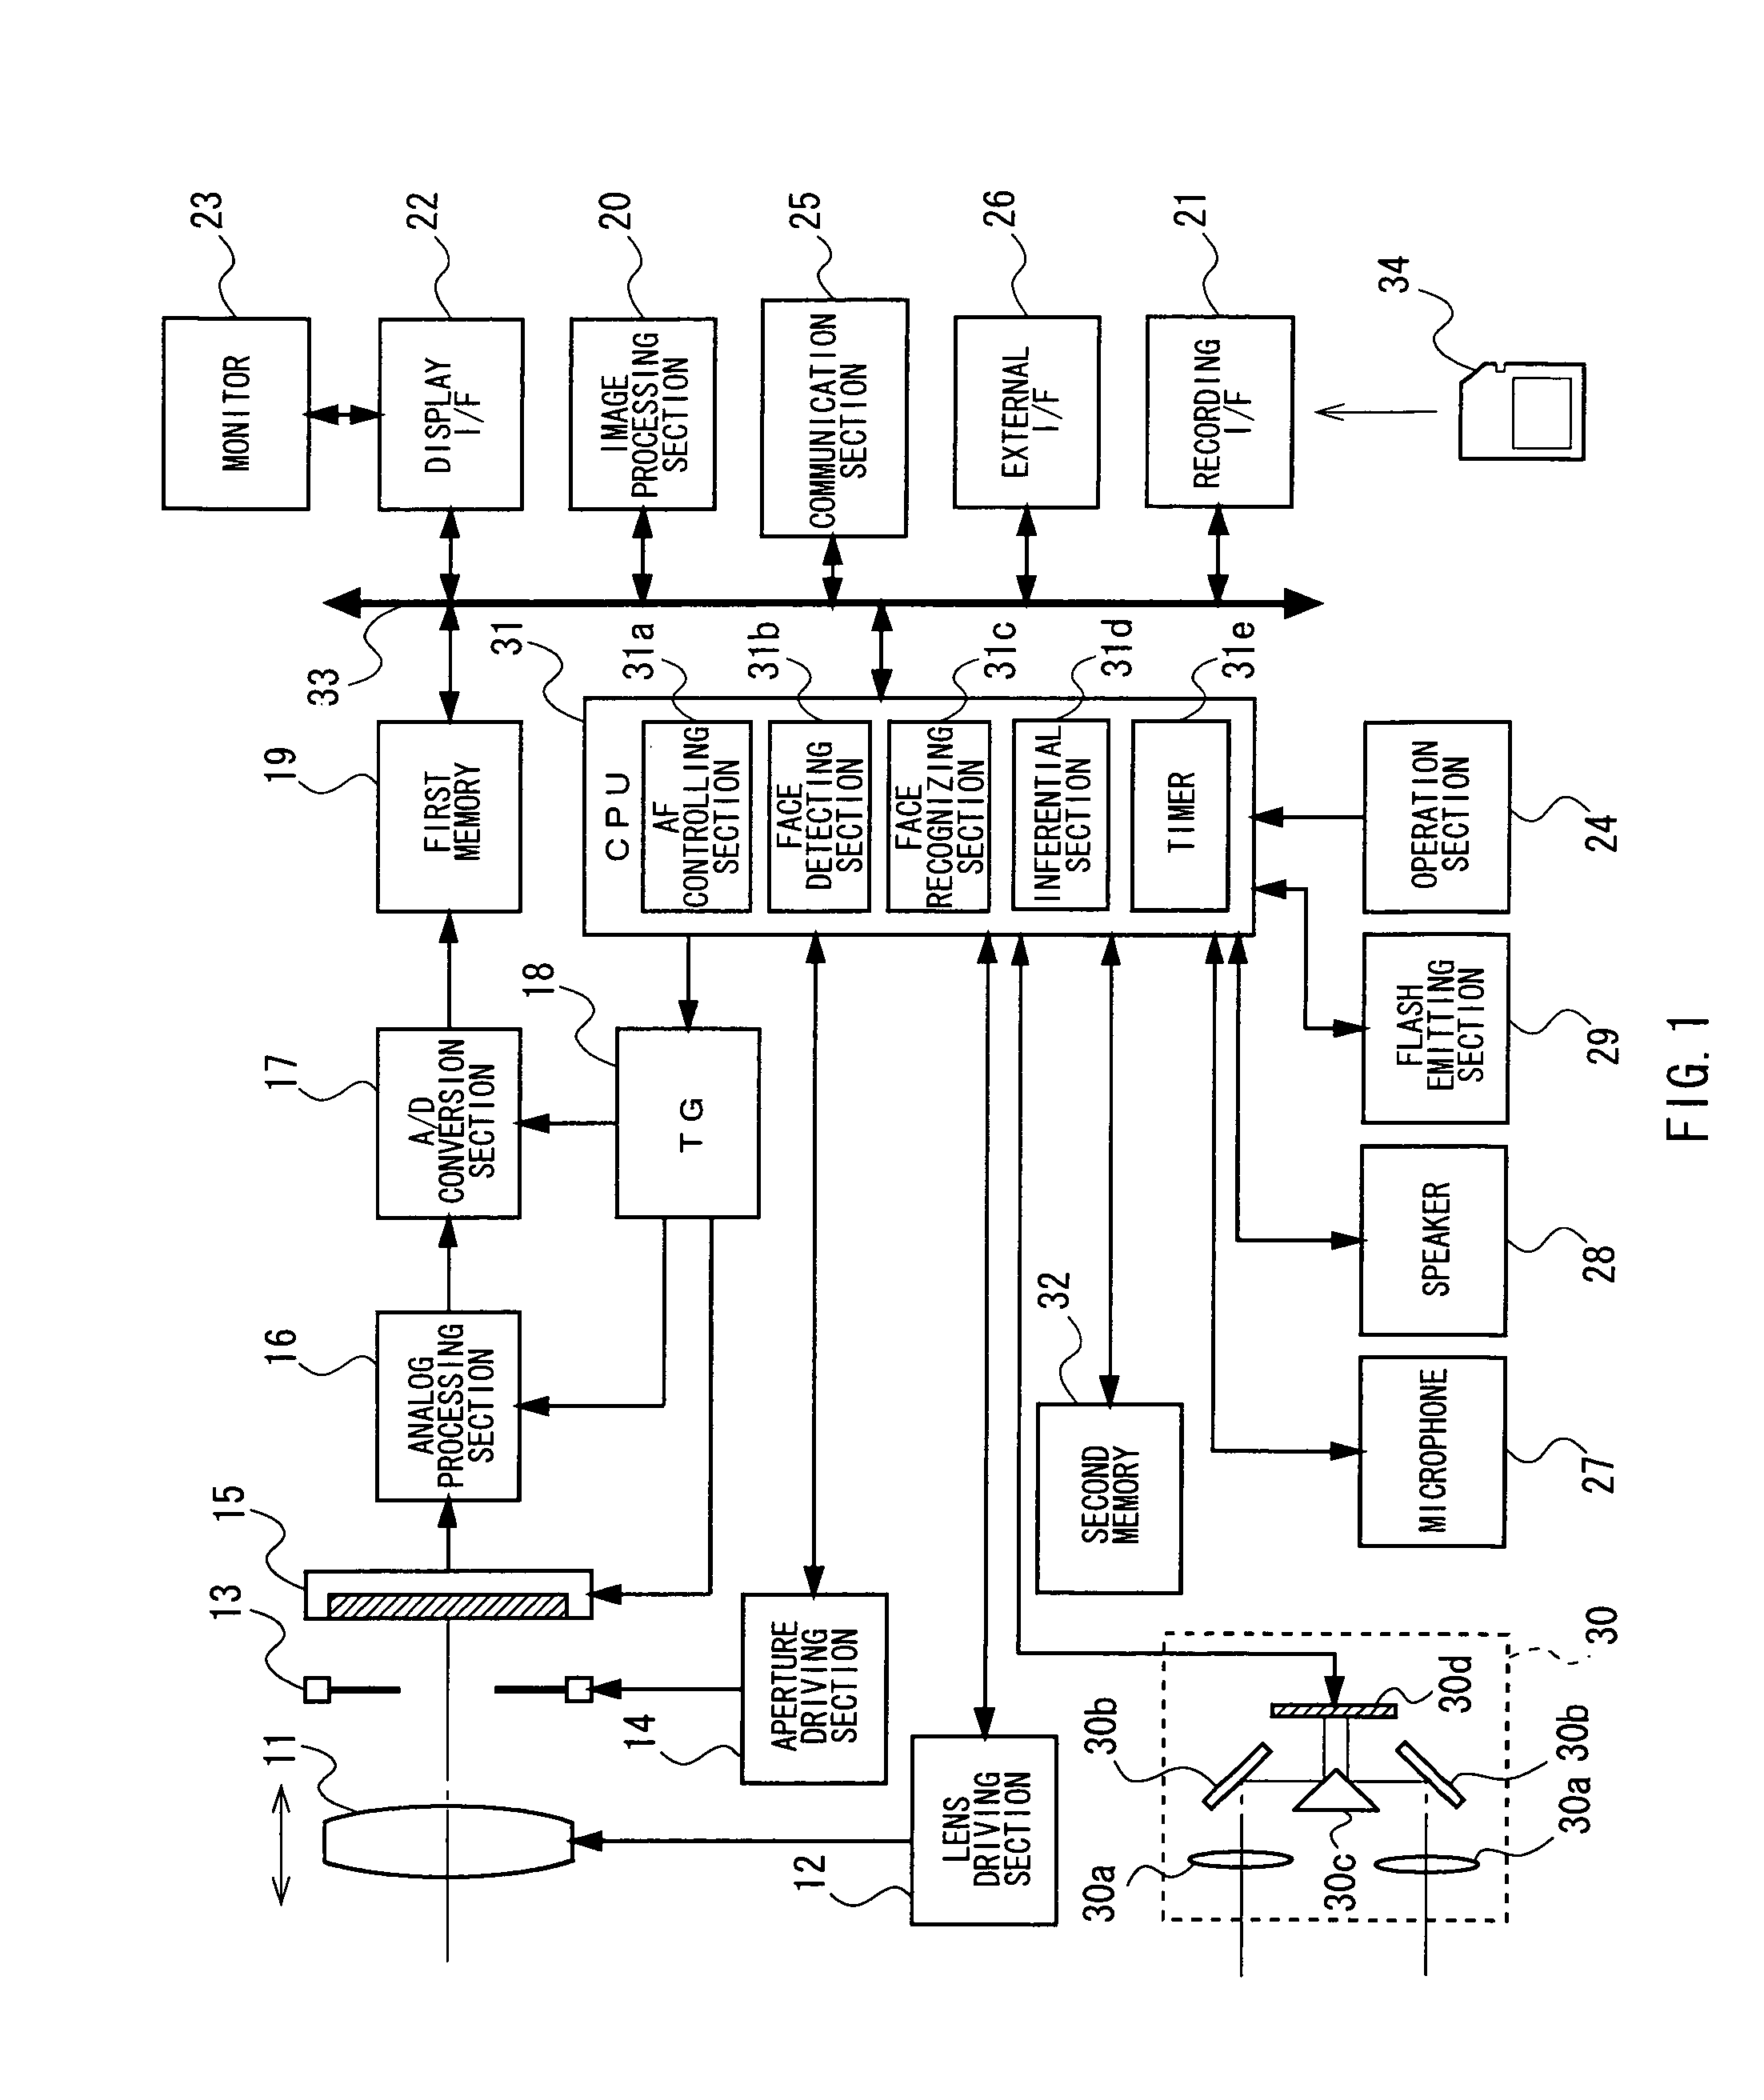 Electronic camera having a face detecting function of a subject